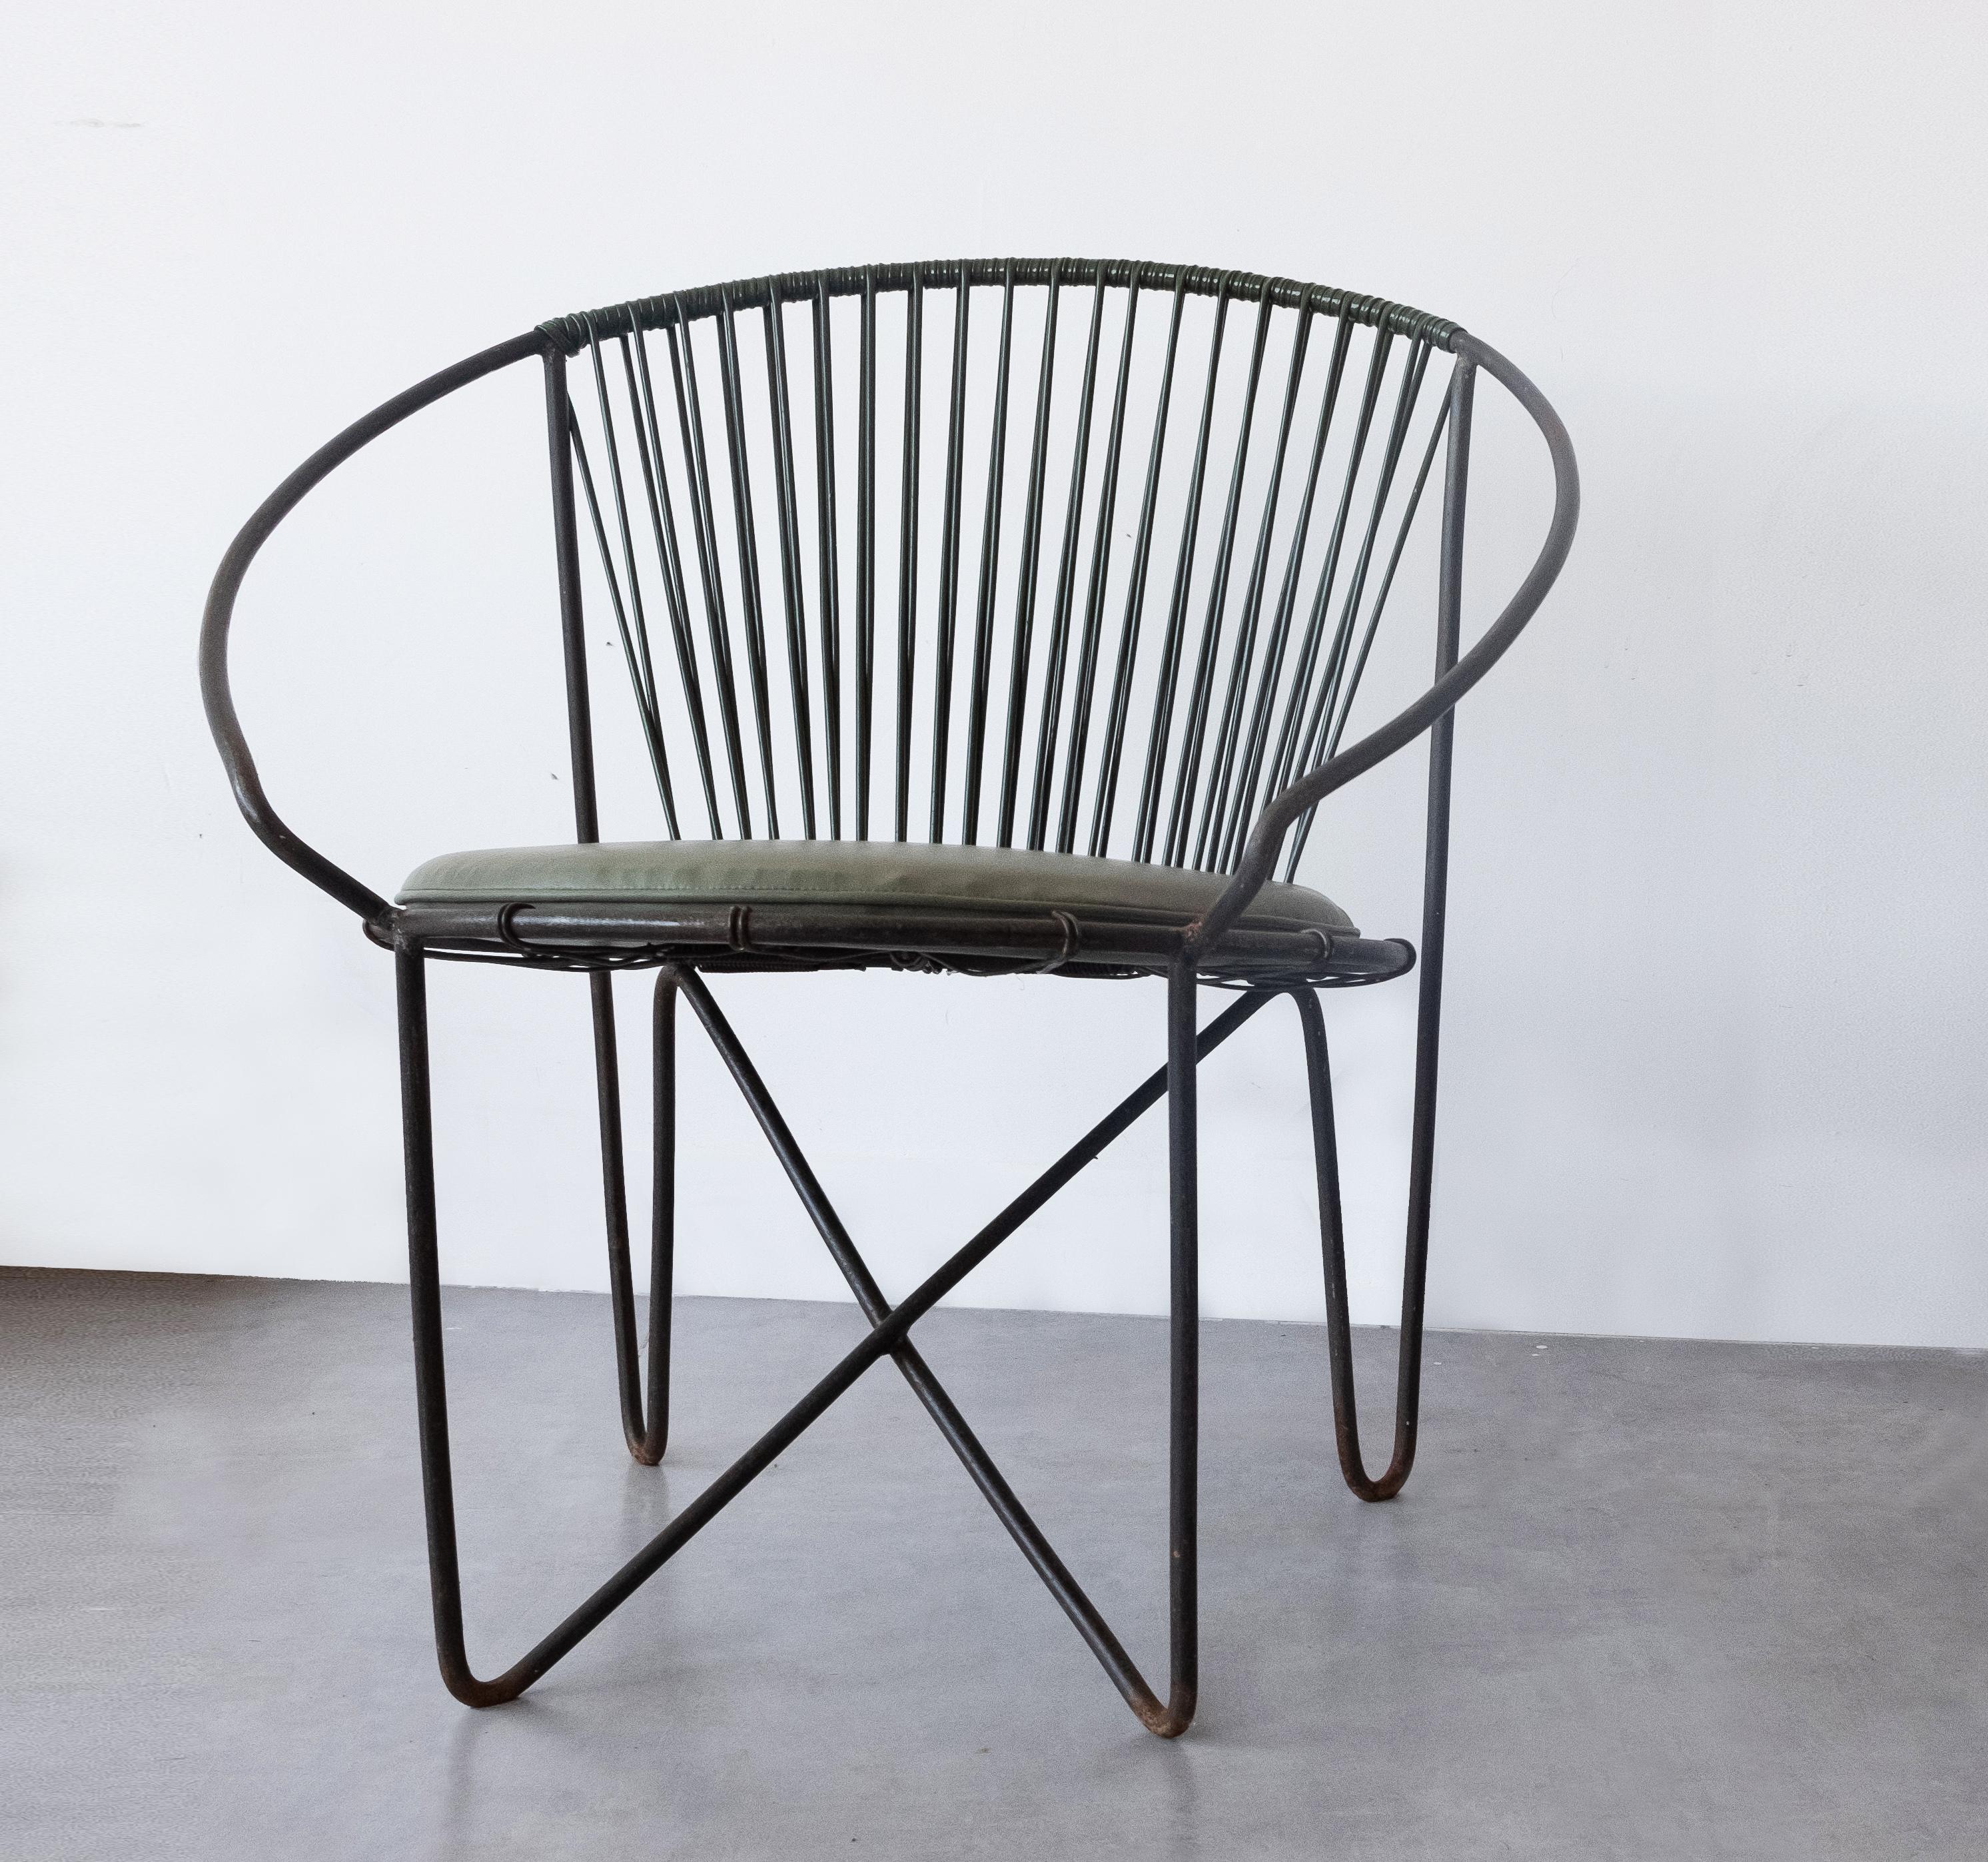 20th Century Pair of Wrought Iron chairs by José Zanine Caldas, Brazil, 1950s For Sale